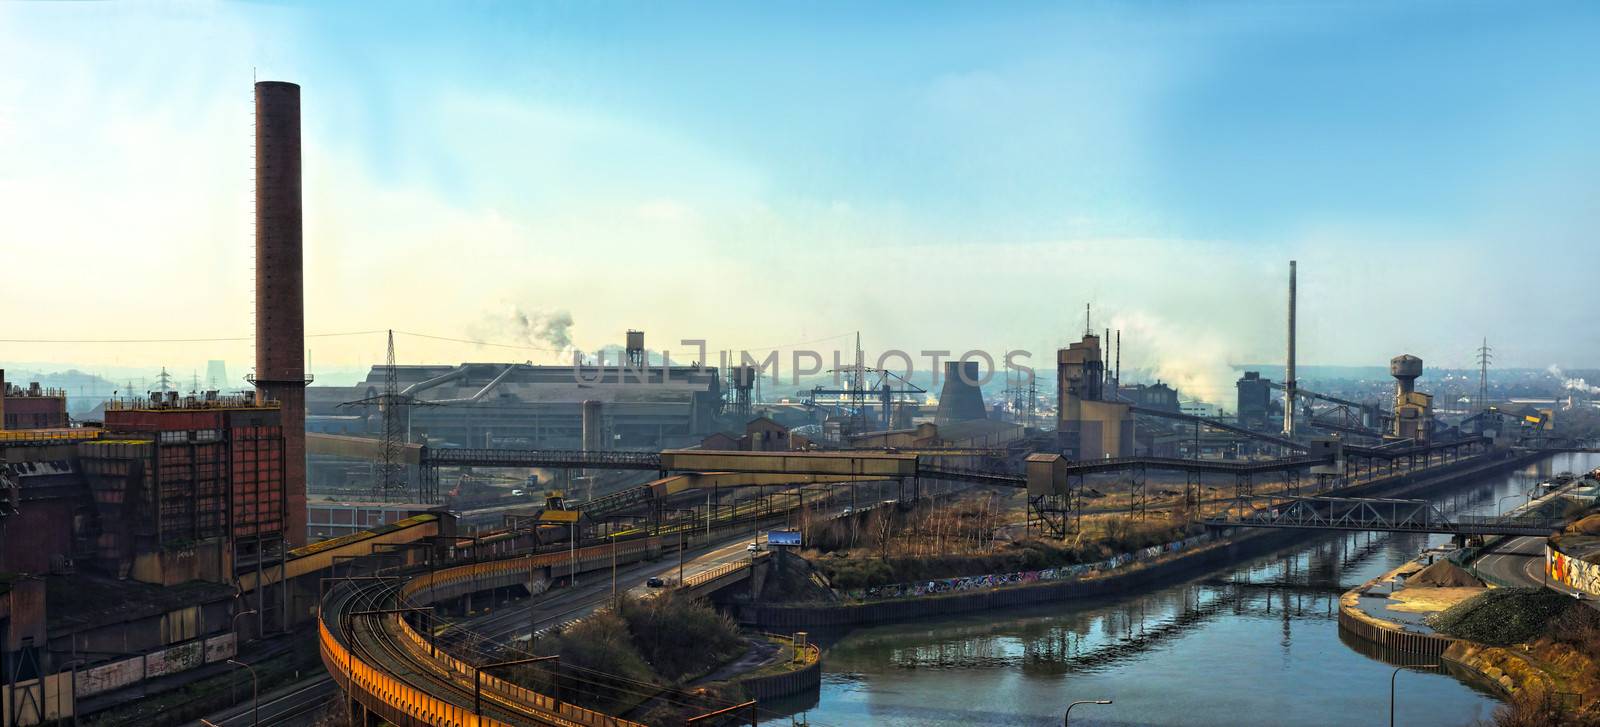 Industrial scene wirh large factory by svedoliver